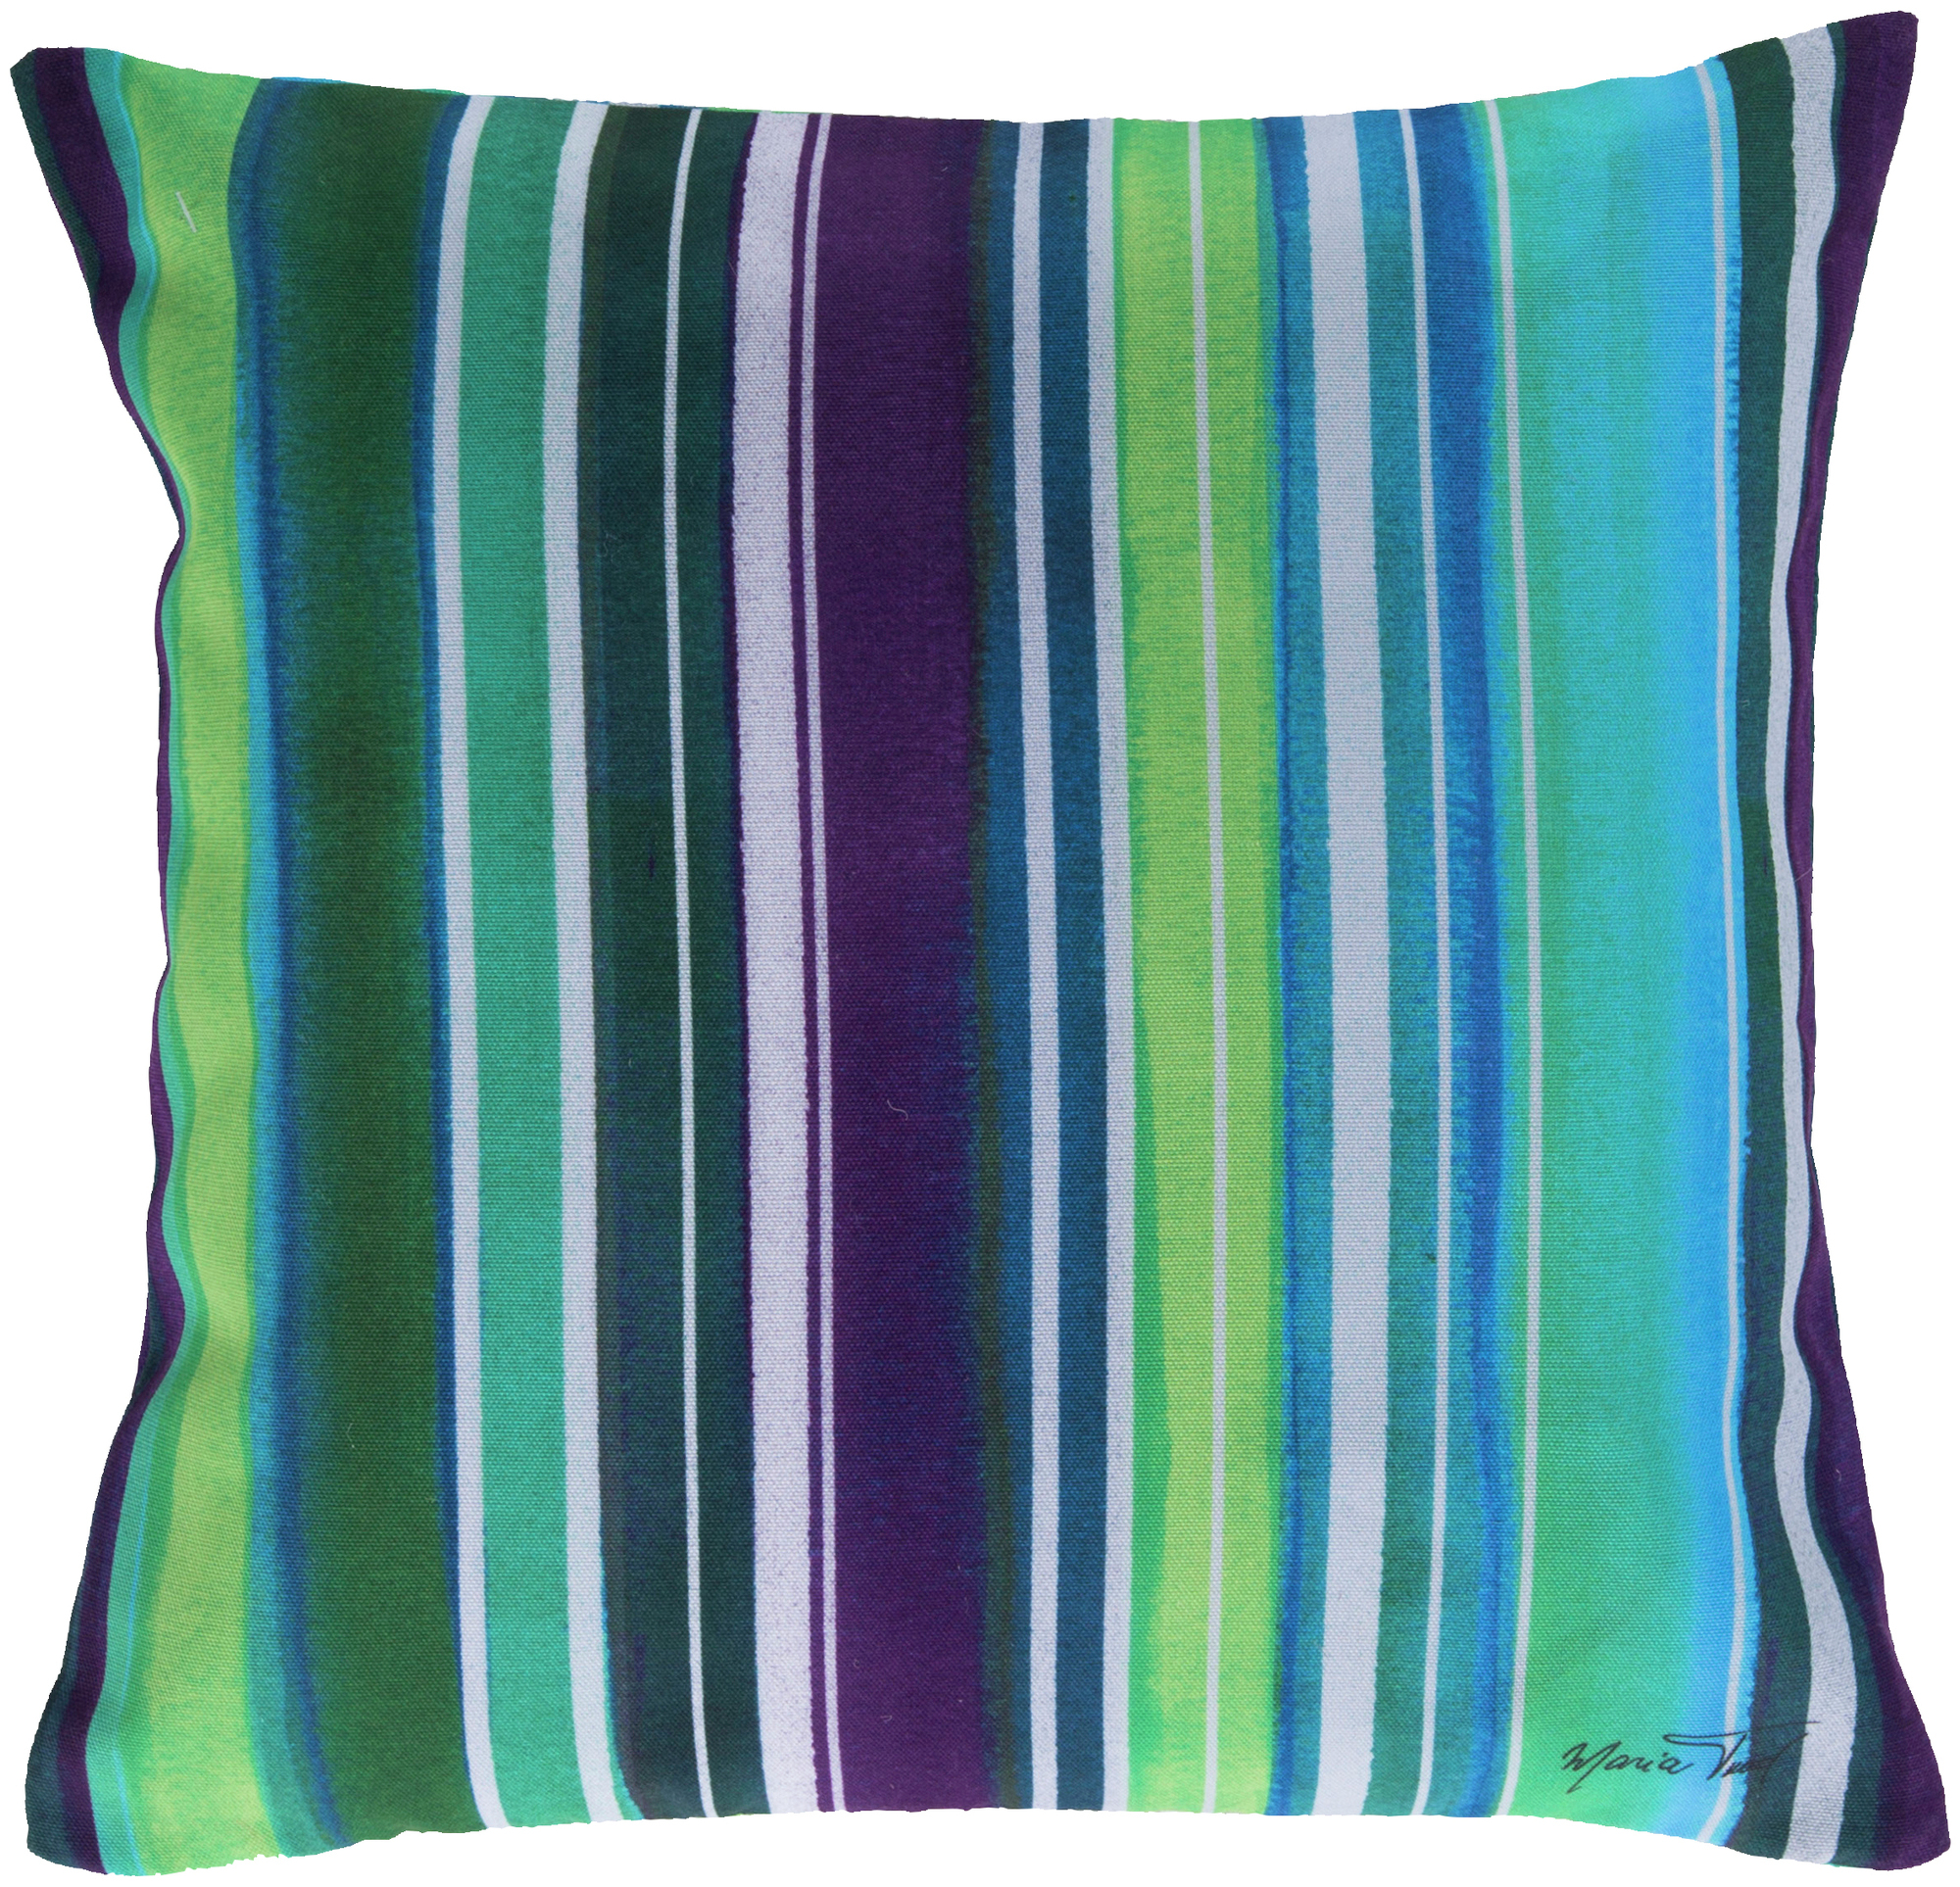 Tiwari Home 20" Green and Blue Nautical Striped Square Throw Pillow Cover